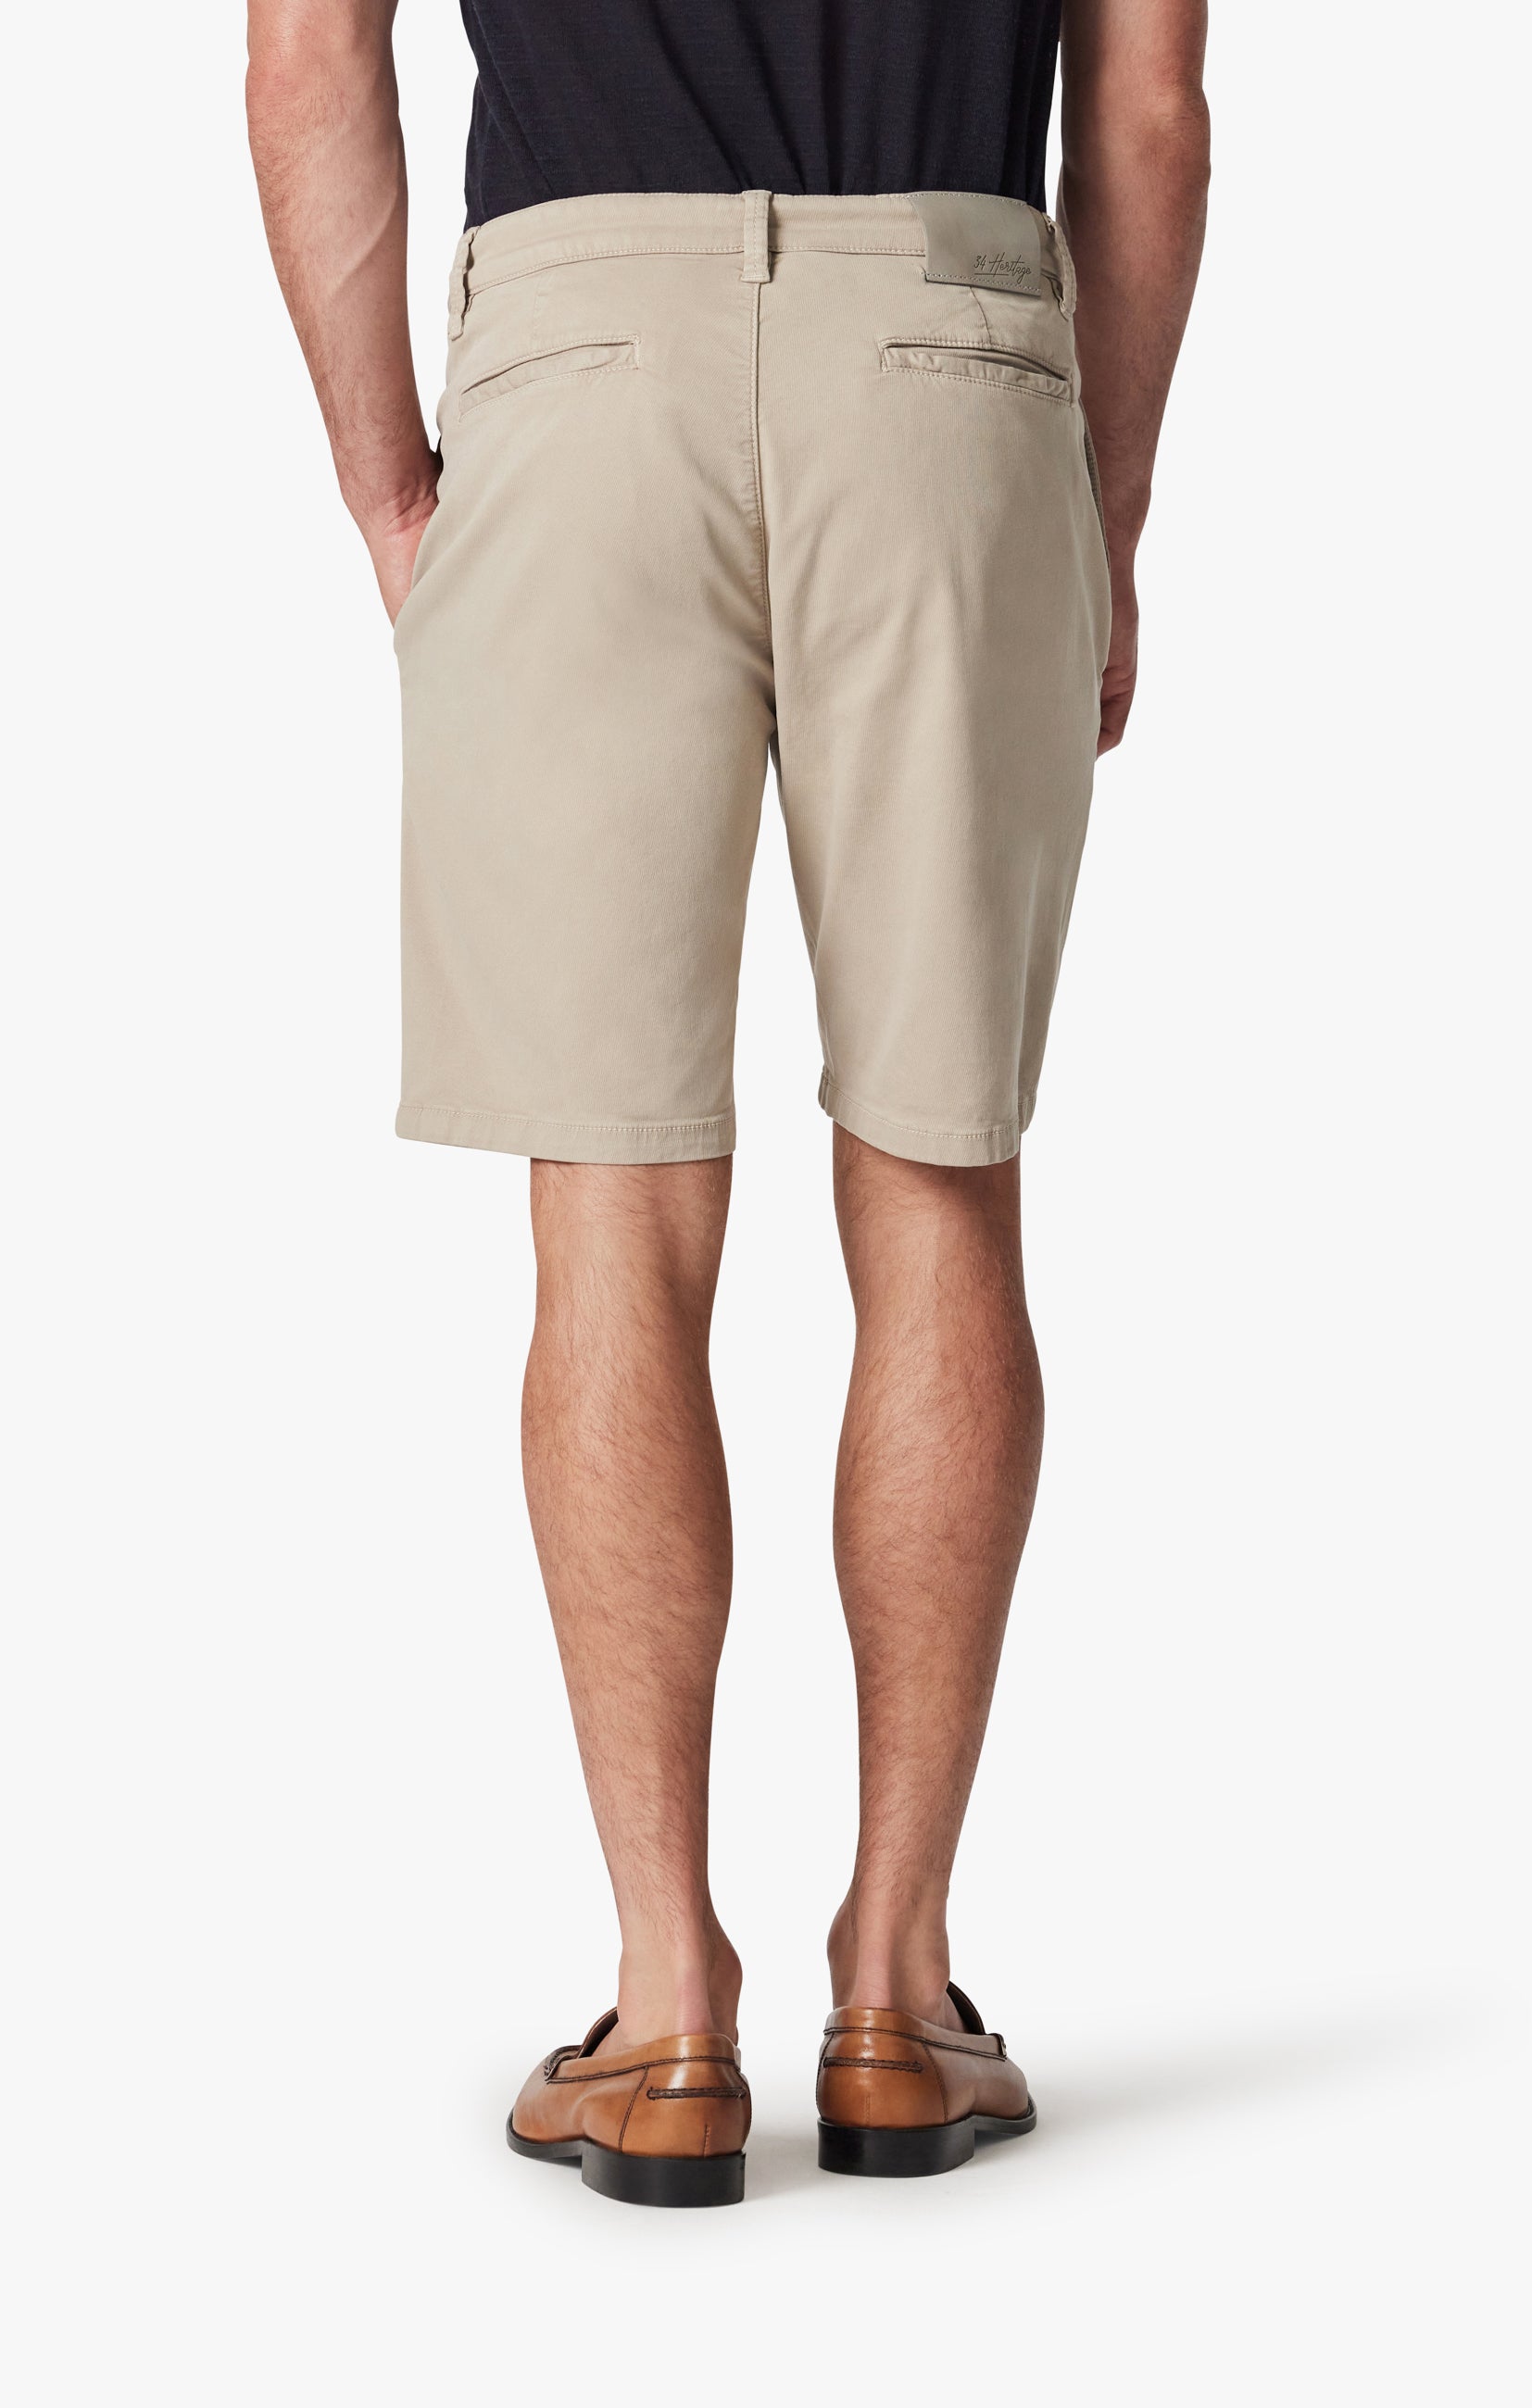 Nevada Shorts In Laurel Oak Soft Touch Image 5